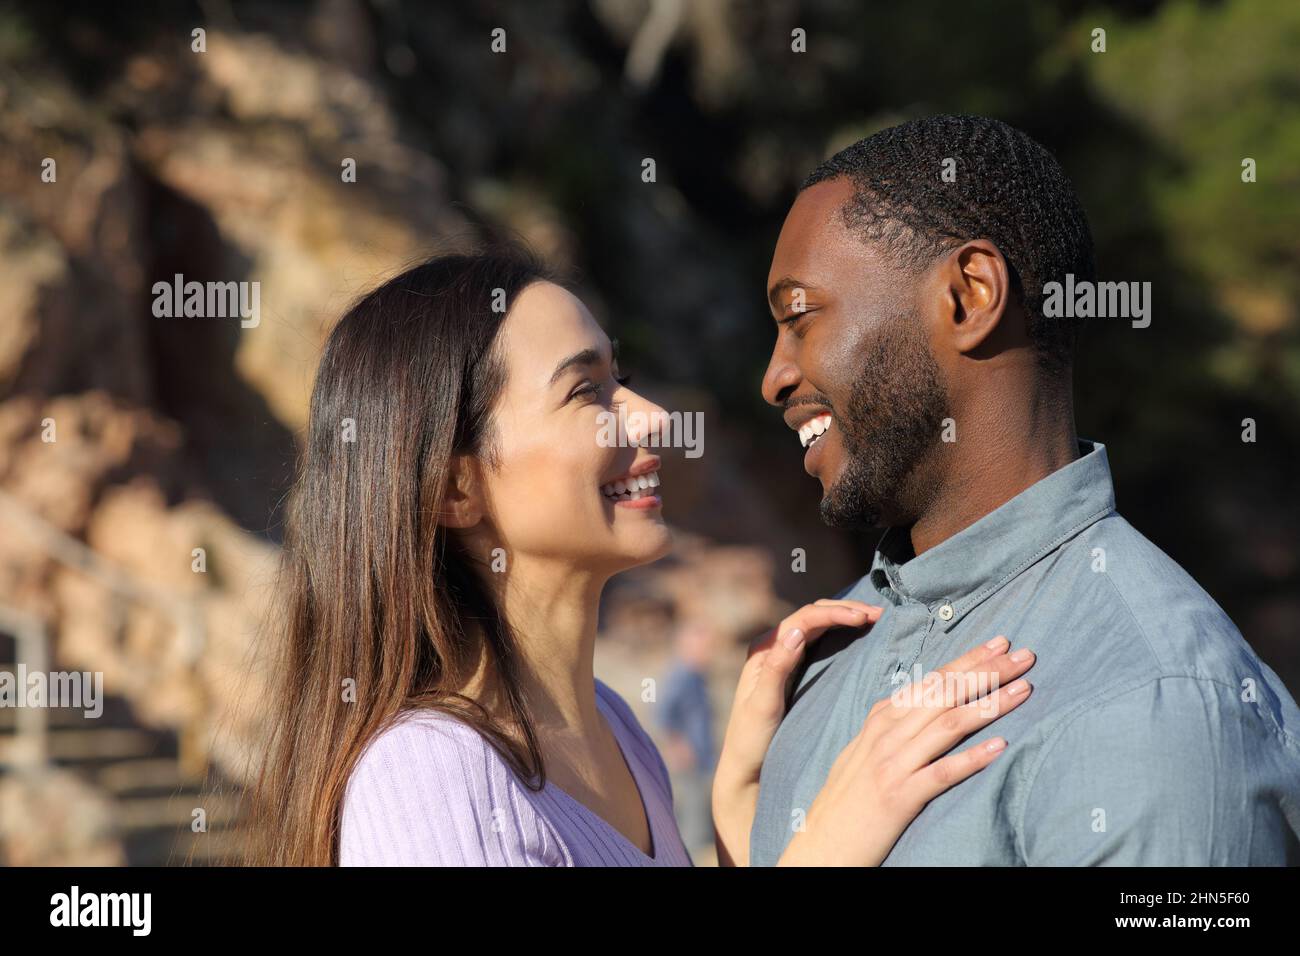 Profile of a happy interracial couple flirting falling in love looking each other Stock Photo